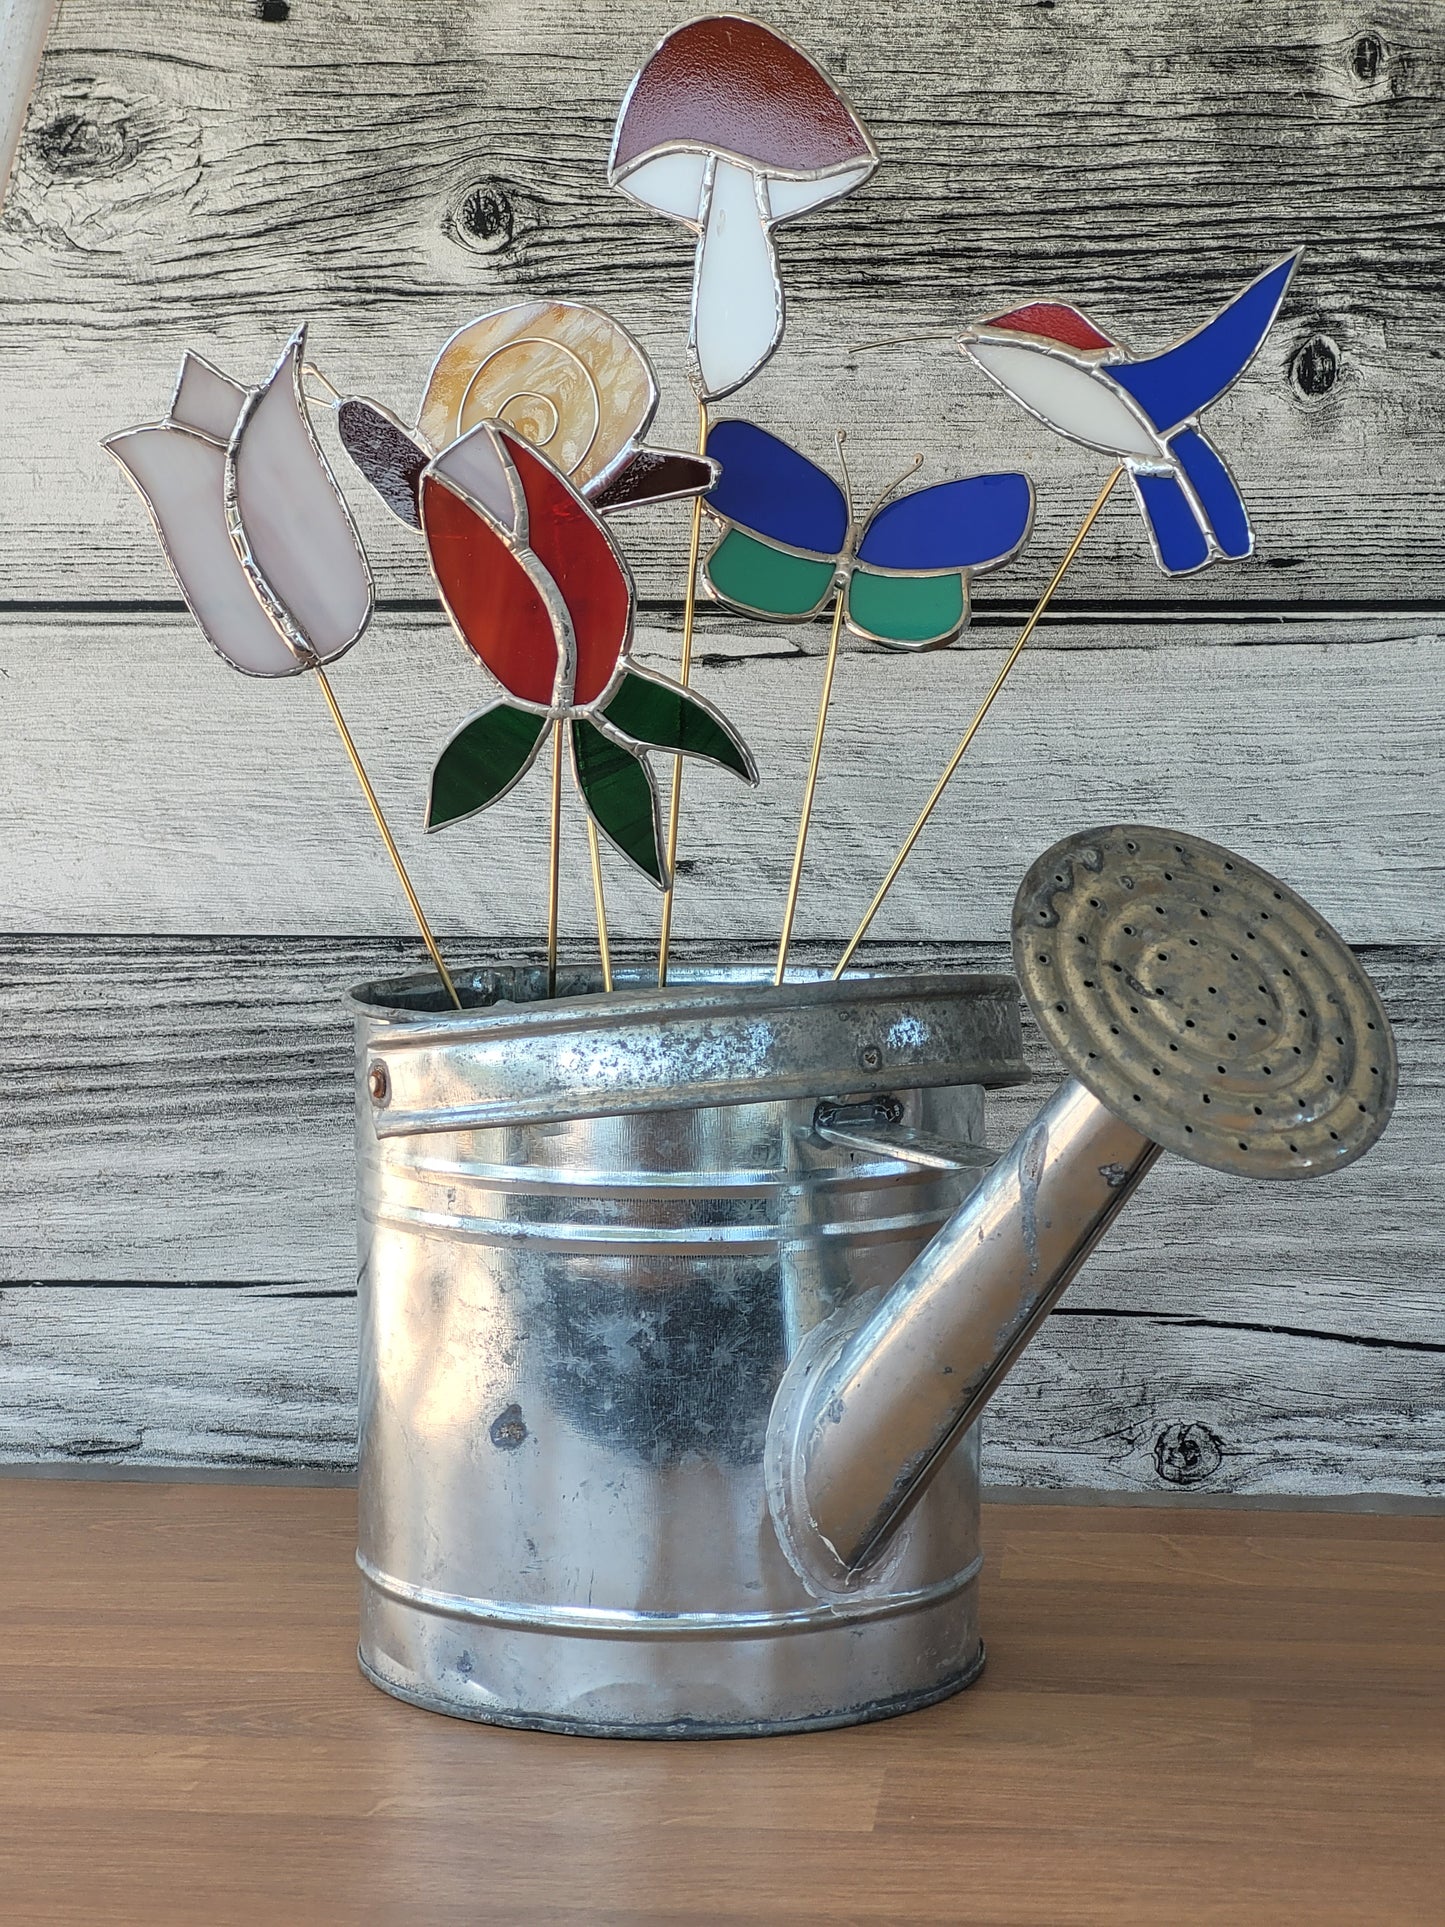 Stained Glass Garden/Planter Stakes workshop - Mothers Day Week Edition